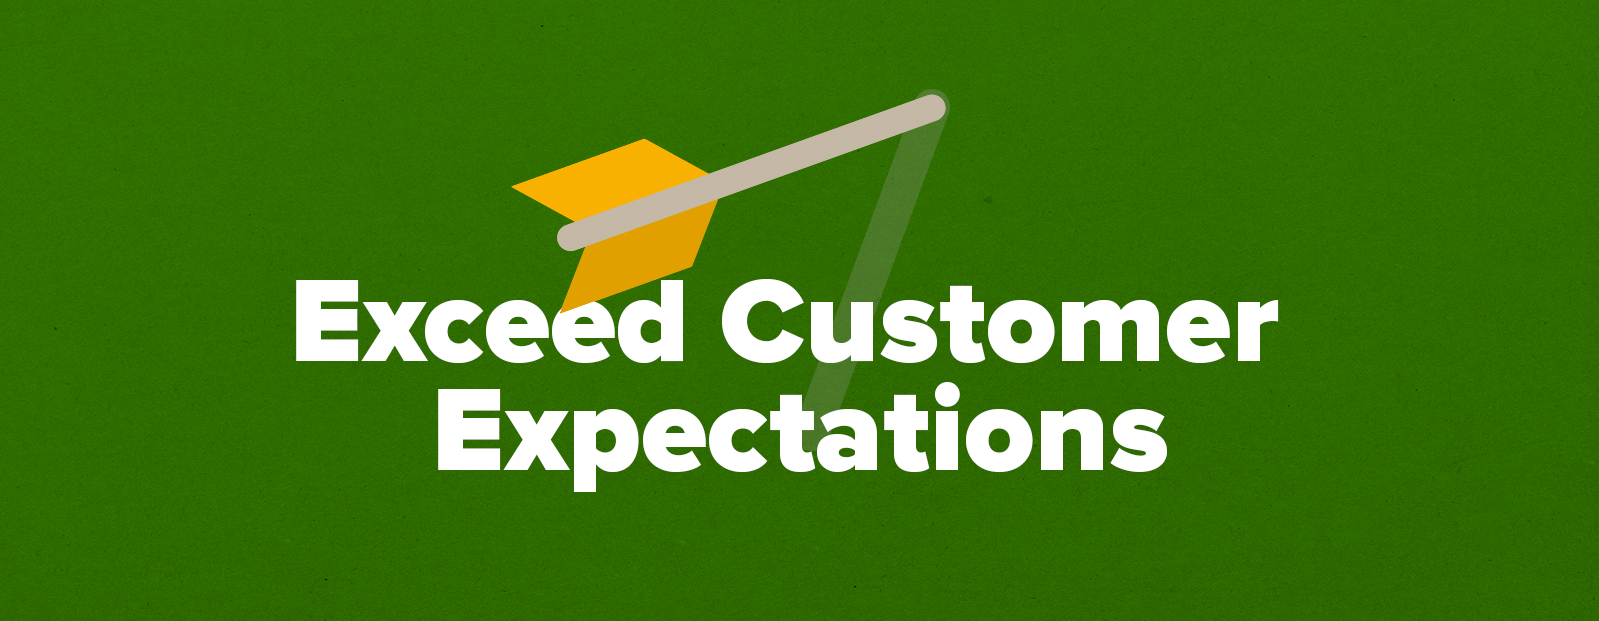 Customer Expectations: 3 Ways to Exceed Expectations